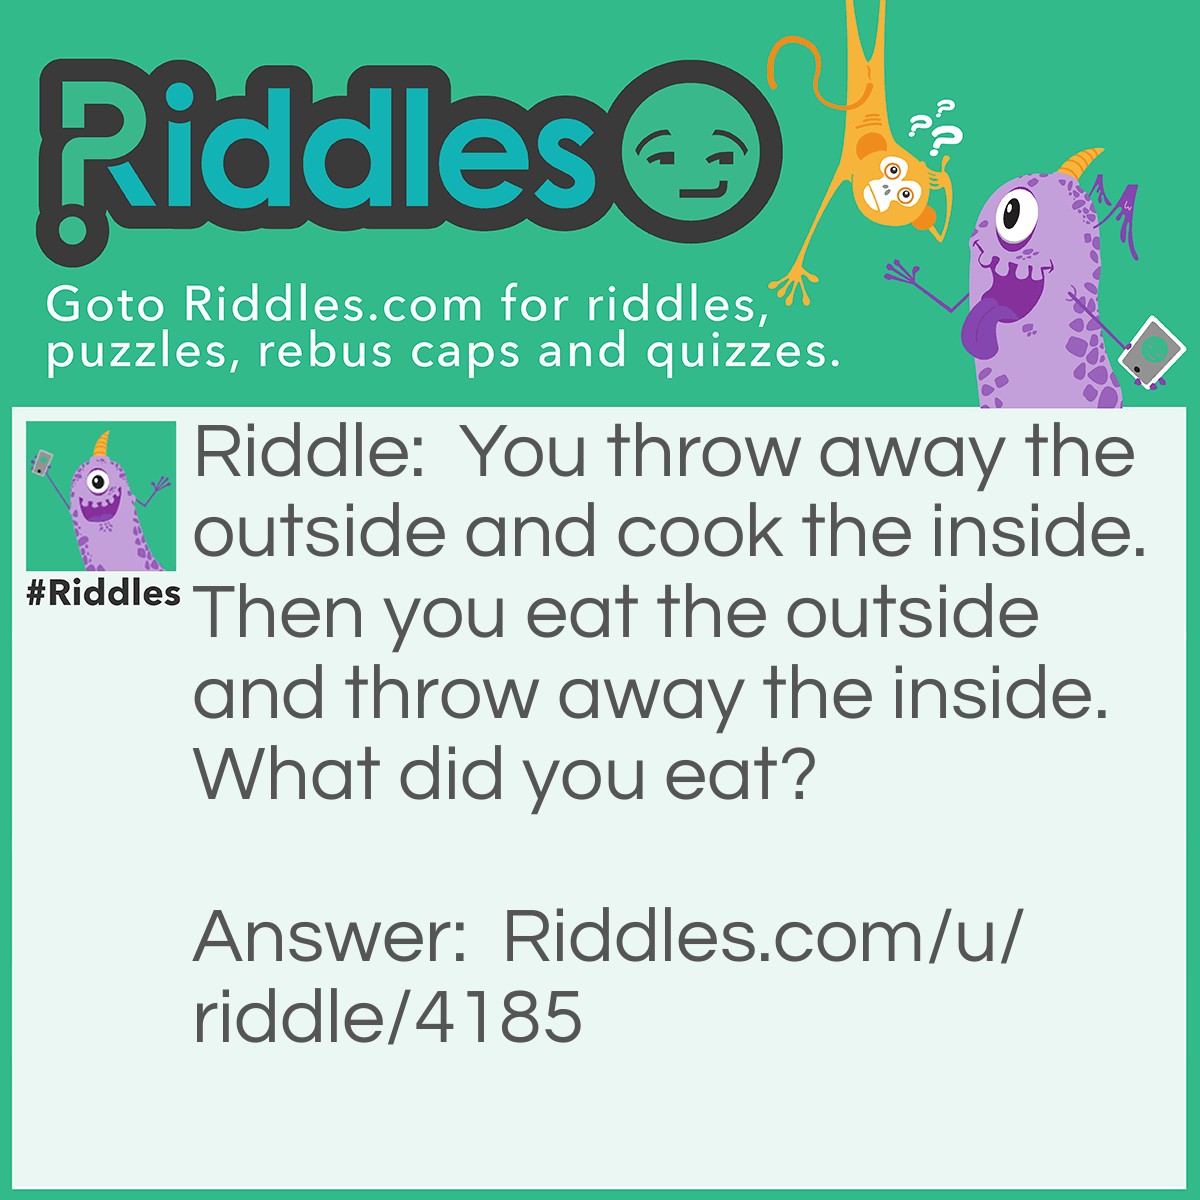 Riddle: You throw away the outside and cook the inside. Then you eat the outside and throw away the inside. What did you eat? Answer: Corn.